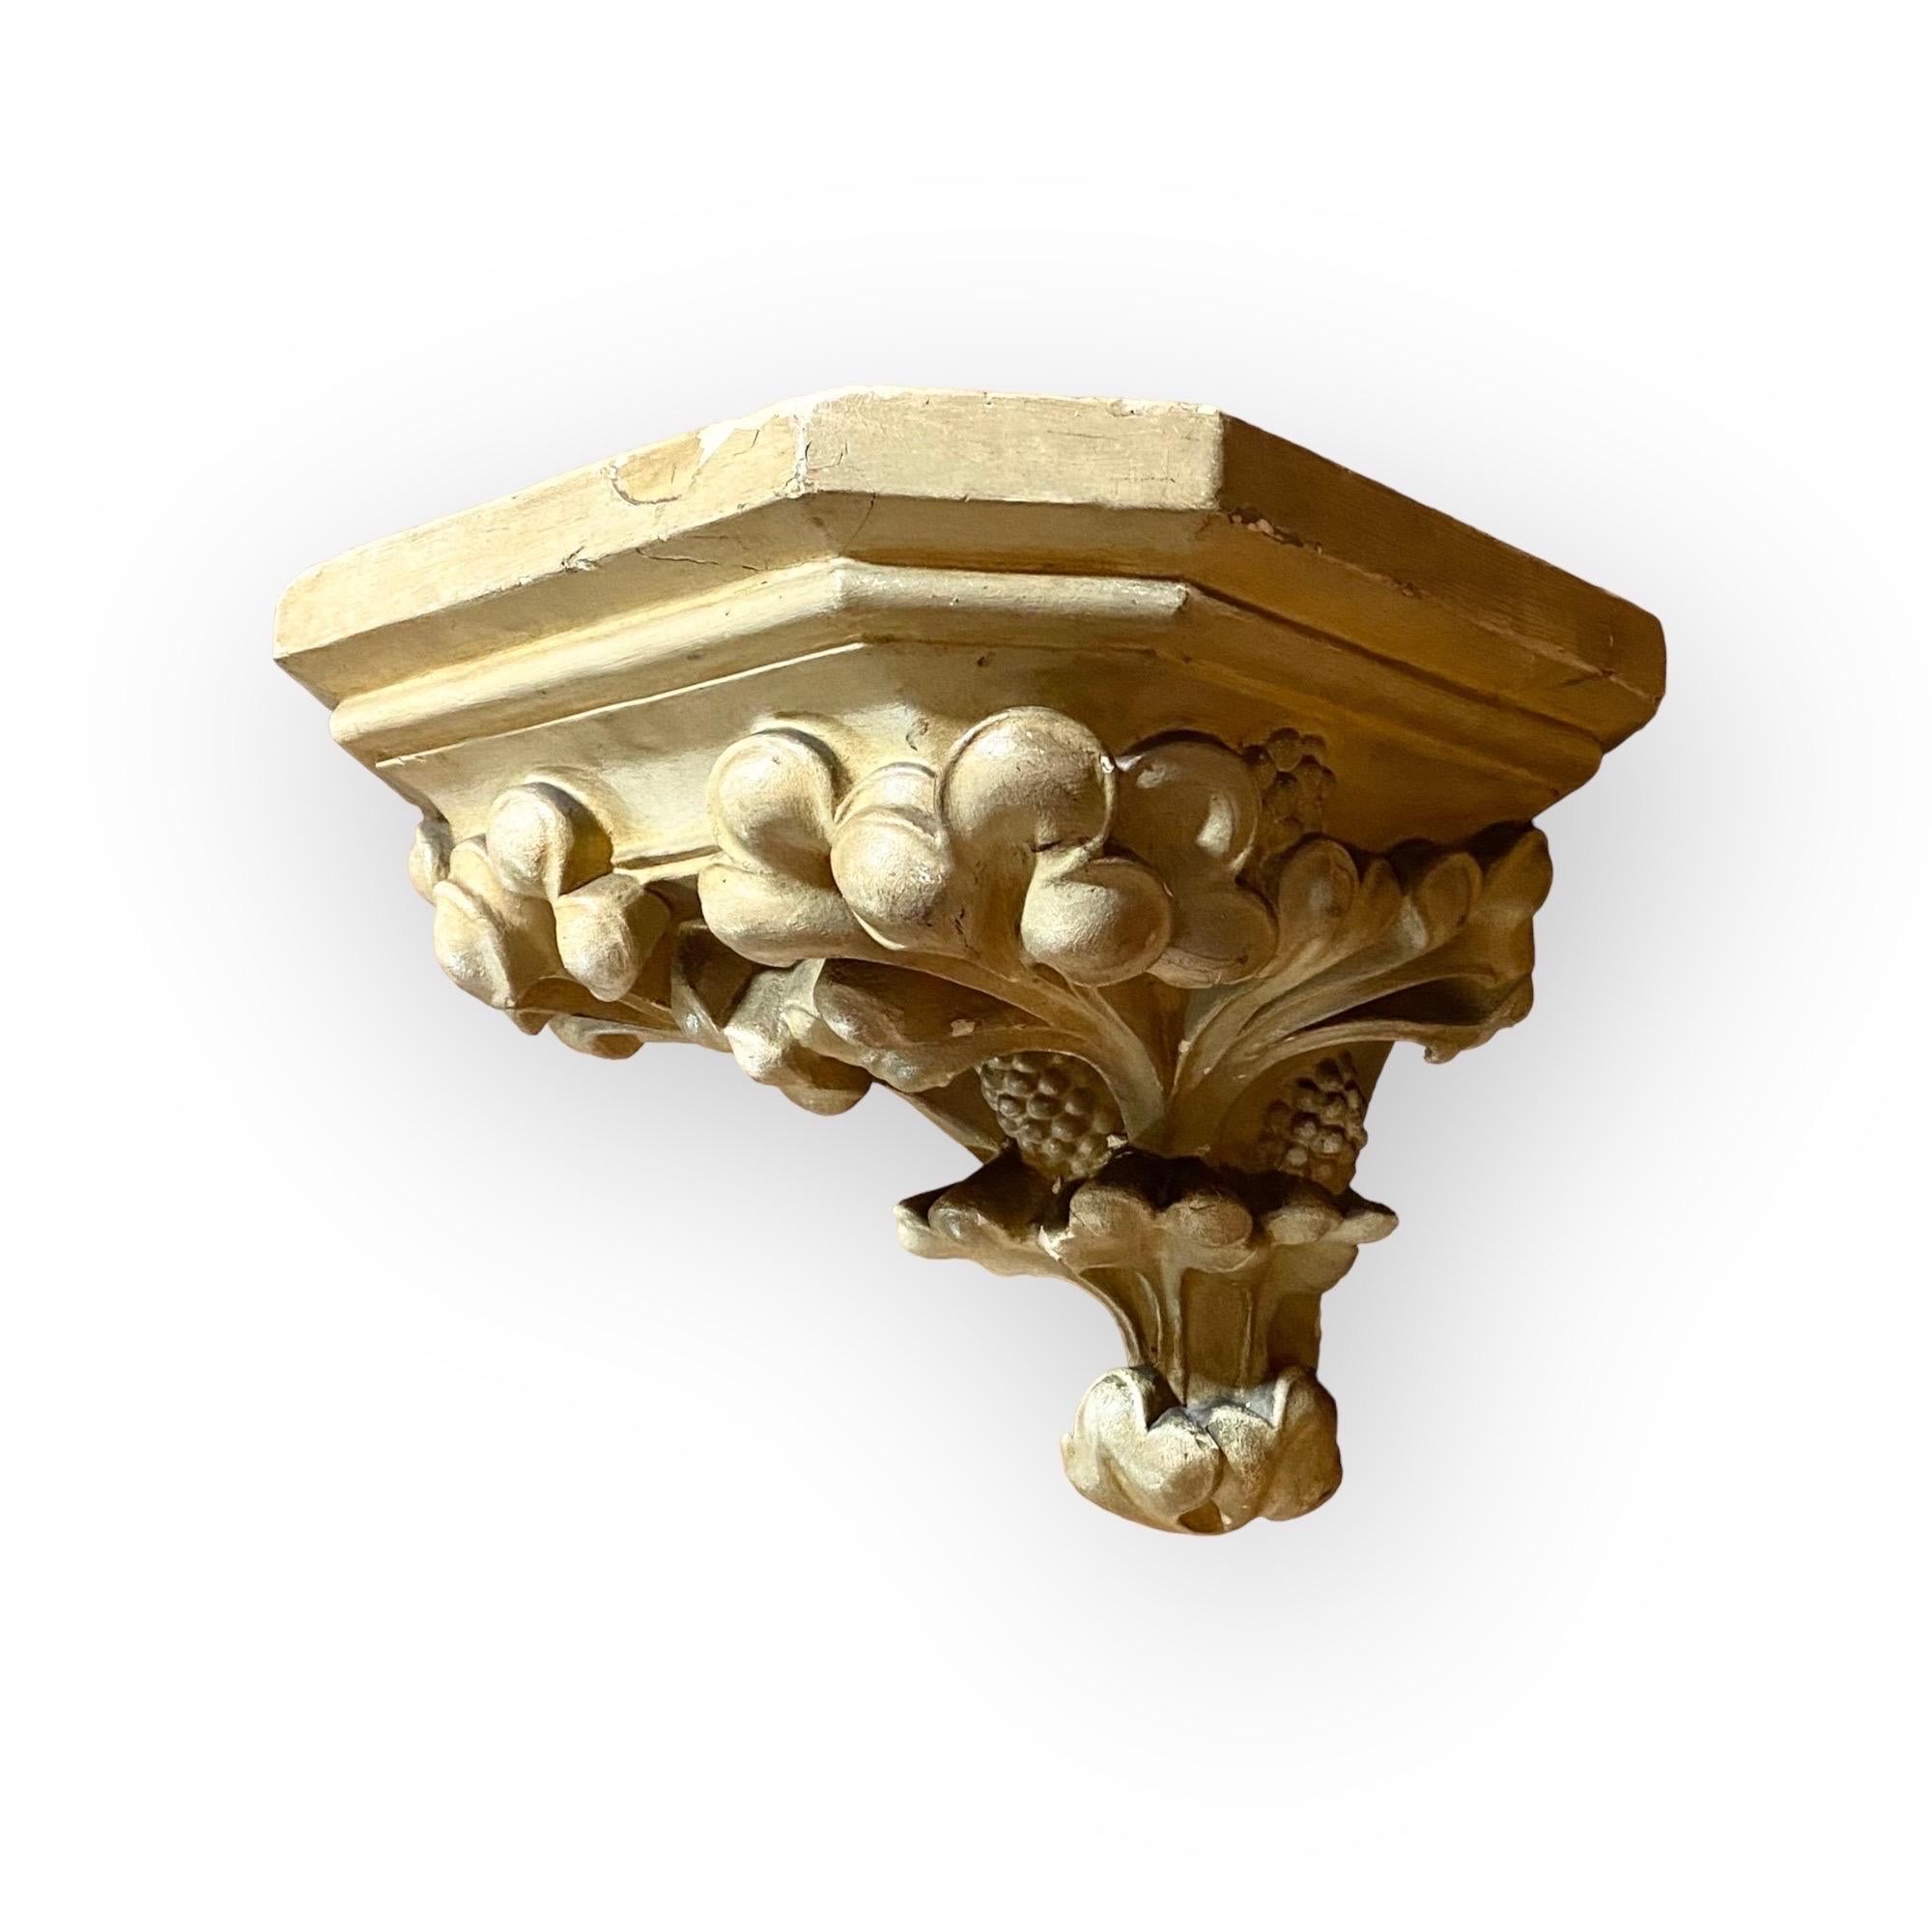 This extended octagonal plaster corbel/wall shelf, possibly Venetian, is in its original colors of painted grey/cream with gold burnished highlights and decorated with molded and stylized berries and leaves. Two back hooks will secure the bracket to